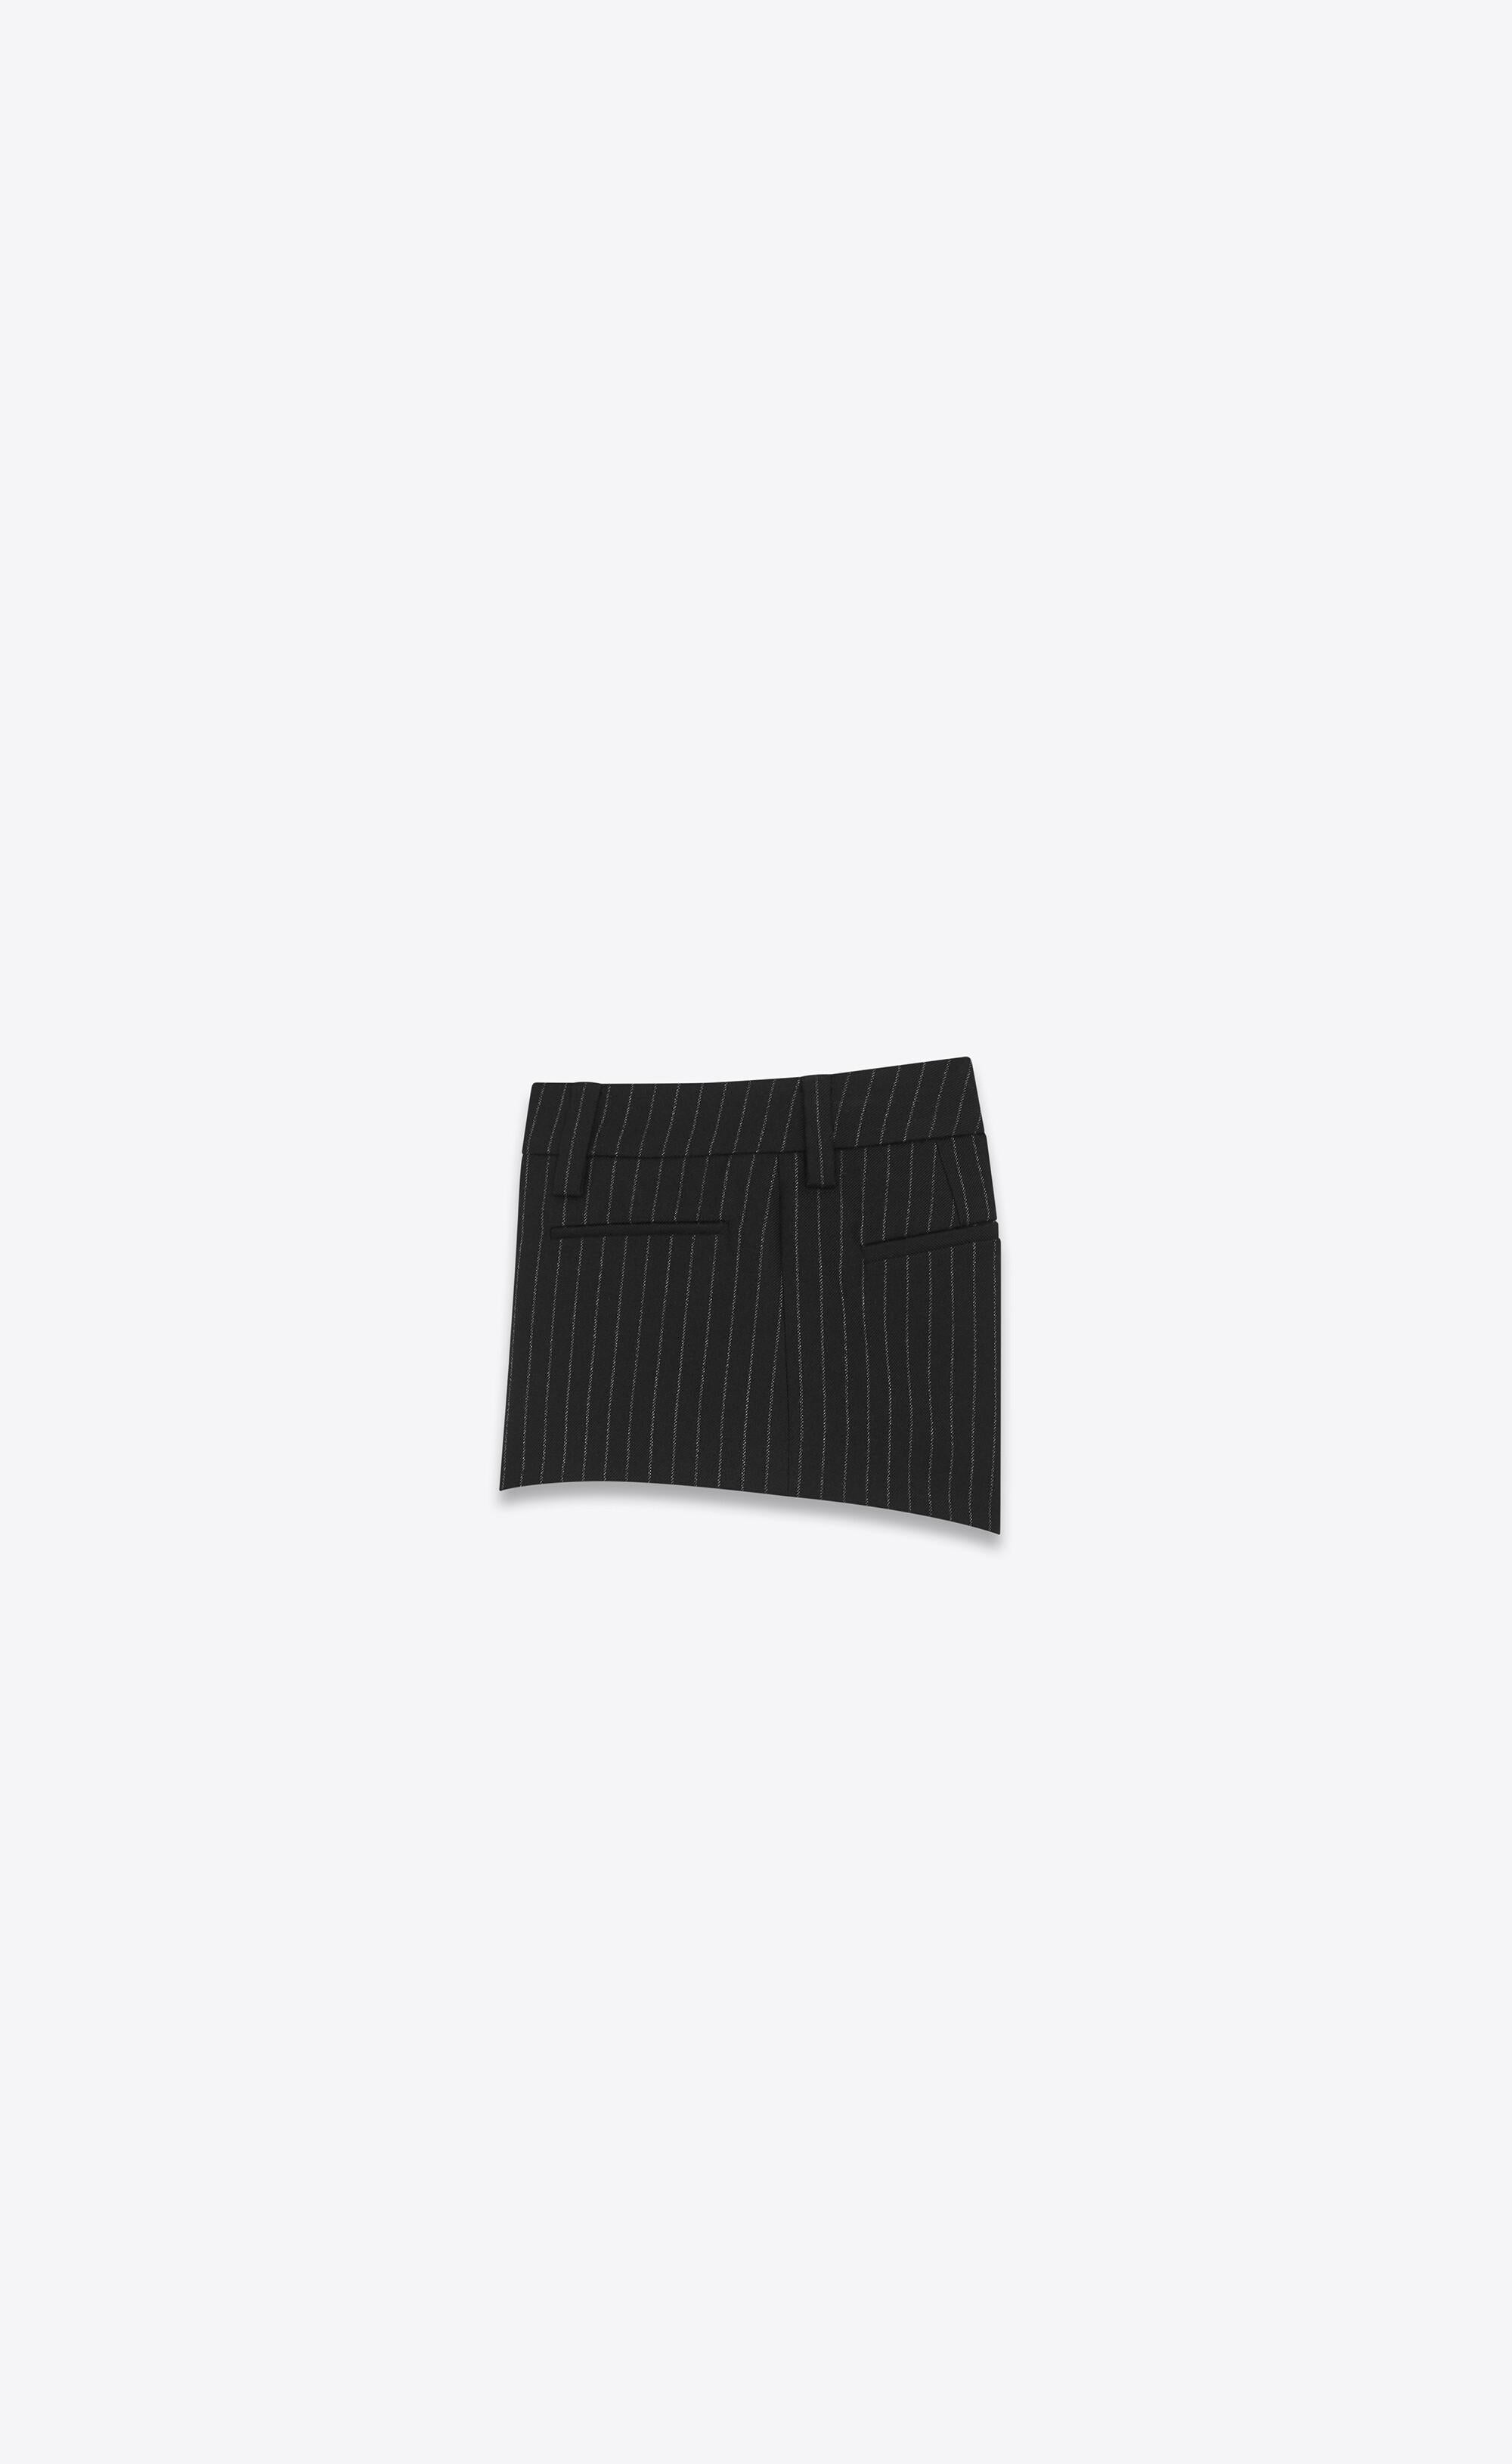 Saint Laurent Runway Black Rive Gauche Striped Wool Flannel Tailored Mini Shorts Size 36

These Saint Laurent Rive Gauche mini shorts made its debut in the Spring Summer 2020 show, modeled by the beautiful Kaia Gerber. Featuring piped pockets, belt